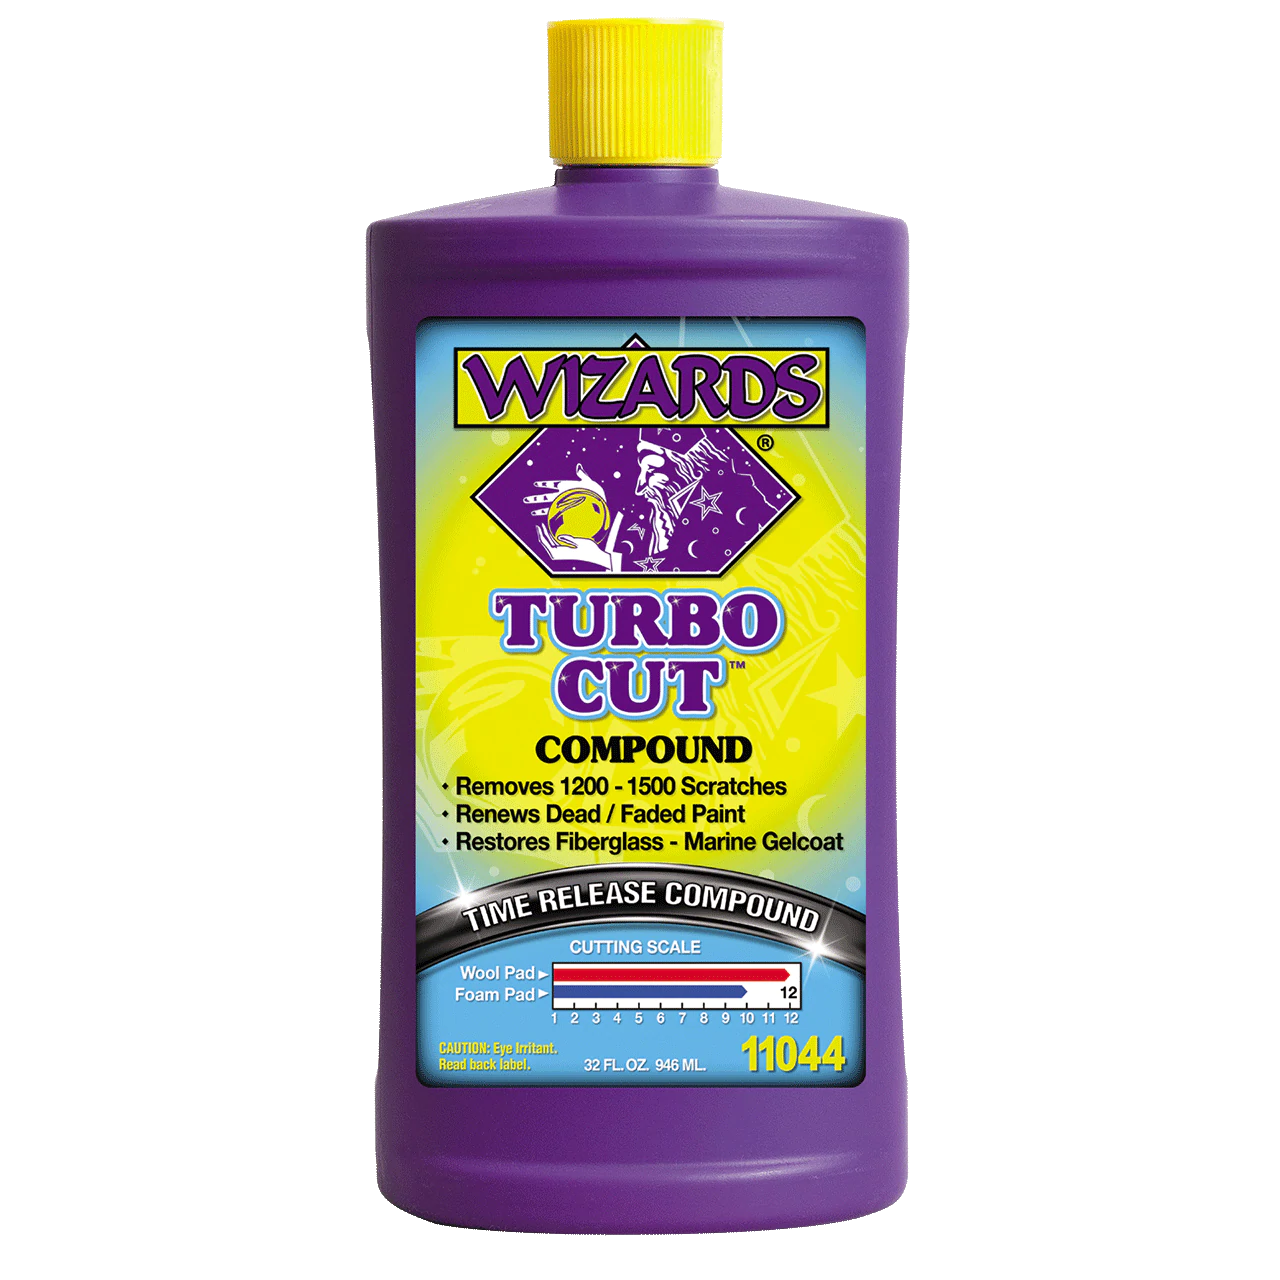 Wizards Turbo Cut Compound